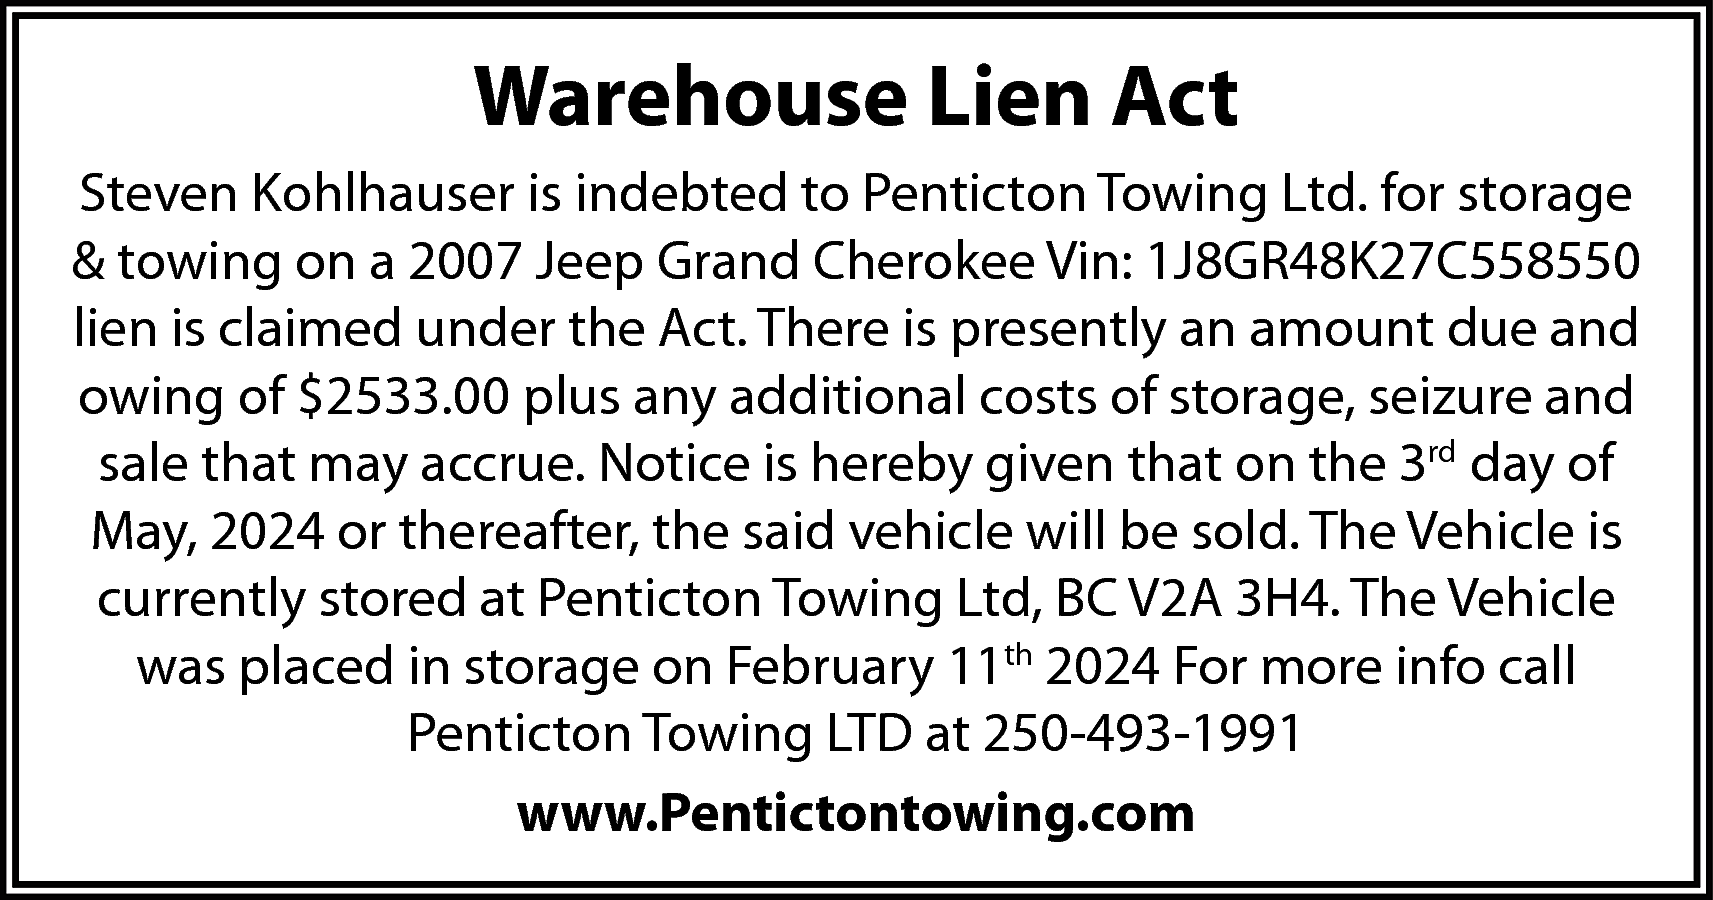 Warehouse Lien Act <br>Steven Kohlhauser  Warehouse Lien Act  Steven Kohlhauser is indebted to Penticton Towing Ltd. for storage  & towing on a 2007 Jeep Grand Cherokee Vin: 1J8GR48K27C558550  lien is claimed under the Act. There is presently an amount due and  owing of $2533.00 plus any additional costs of storage, seizure and  sale that may accrue. Notice is hereby given that on the 3rd day of  May, 2024 or thereafter, the said vehicle will be sold. The Vehicle is  currently stored at Penticton Towing Ltd, BC V2A 3H4. The Vehicle  was placed in storage on February 11th 2024 For more info call  Penticton Towing LTD at 250-493-1991  www.Pentictontowing.com    